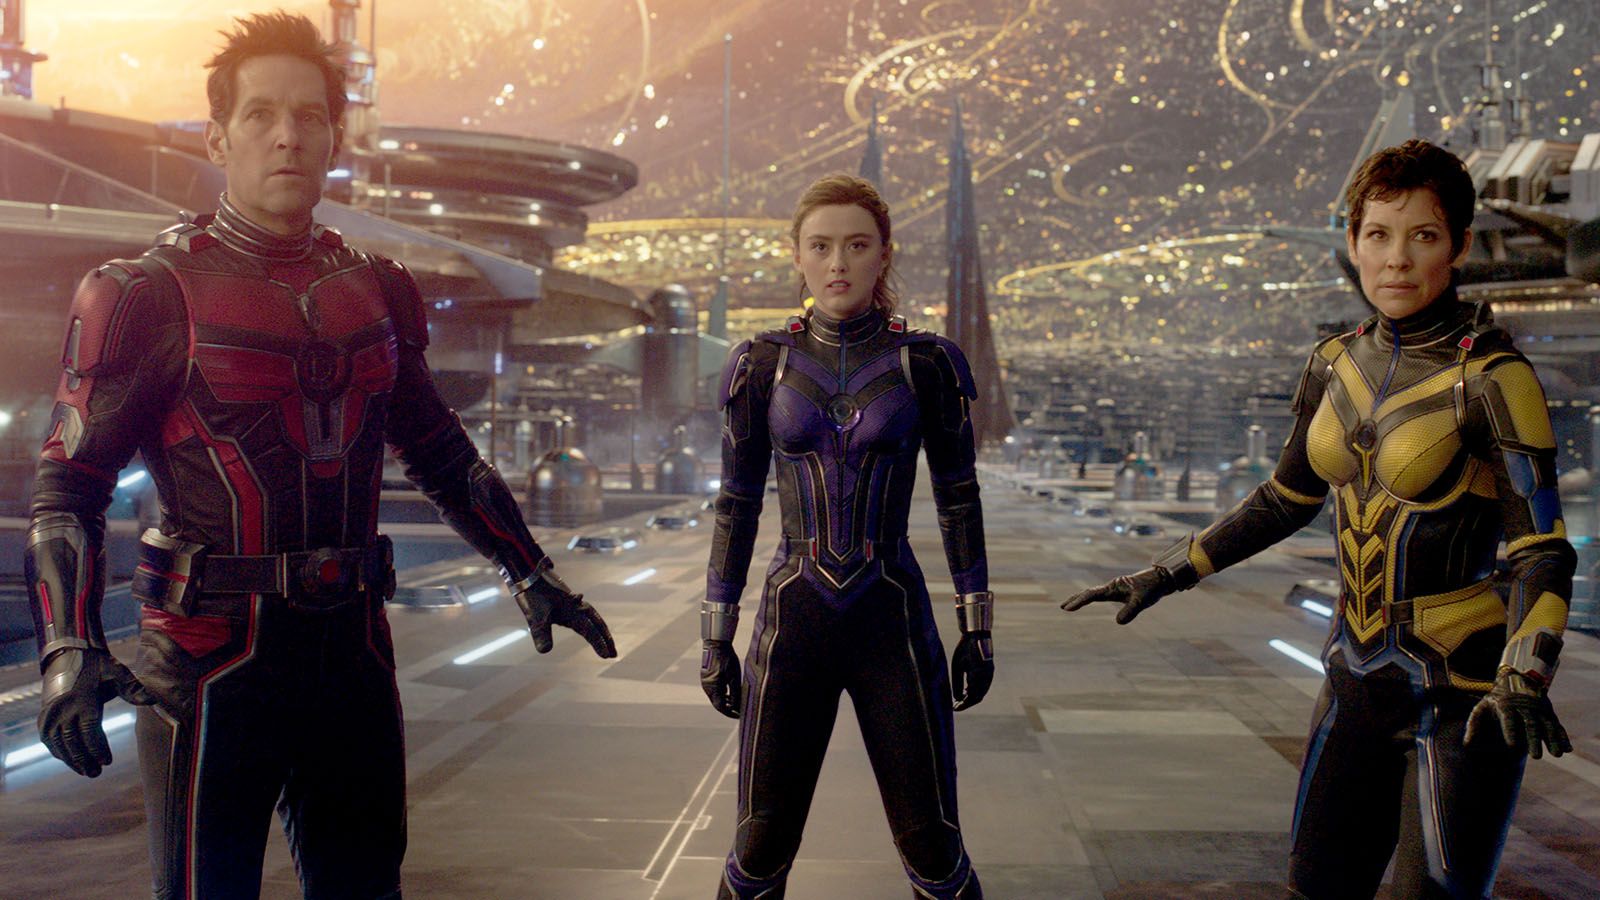 The Marvel Cinematic Universe scored another No. 1 movie with Ant-Man and The Wasp: Quantumania, starring, from left, Paul Rudd, Kathryn Newton, and Evangeline Lilly.